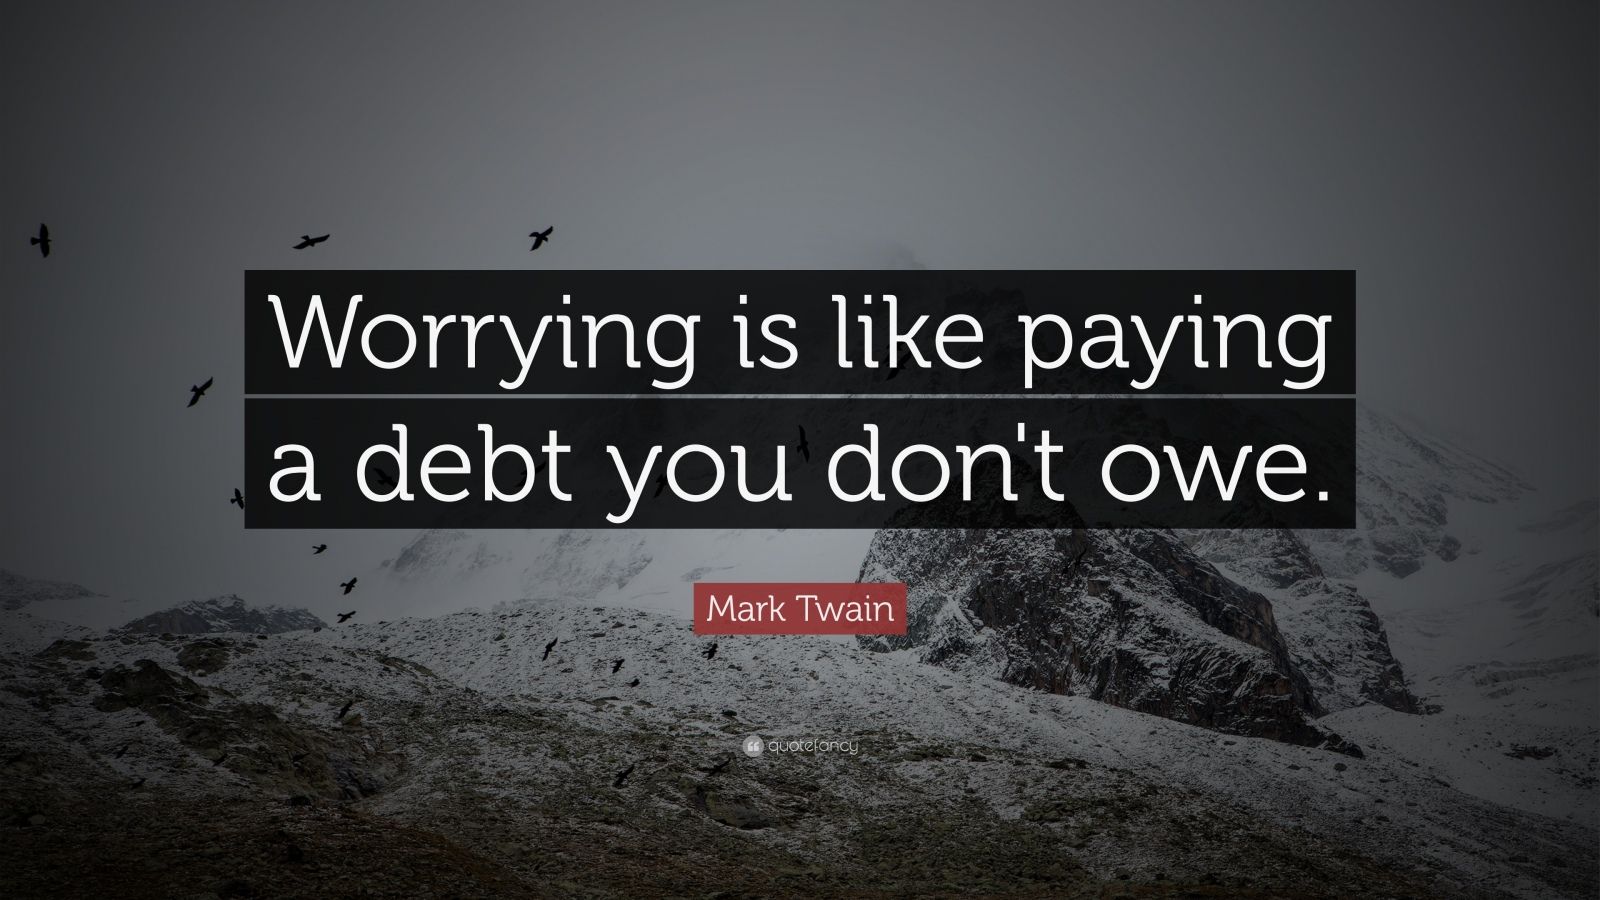 4995 Mark Twain Quote Worrying is like paying a debt you don t owe